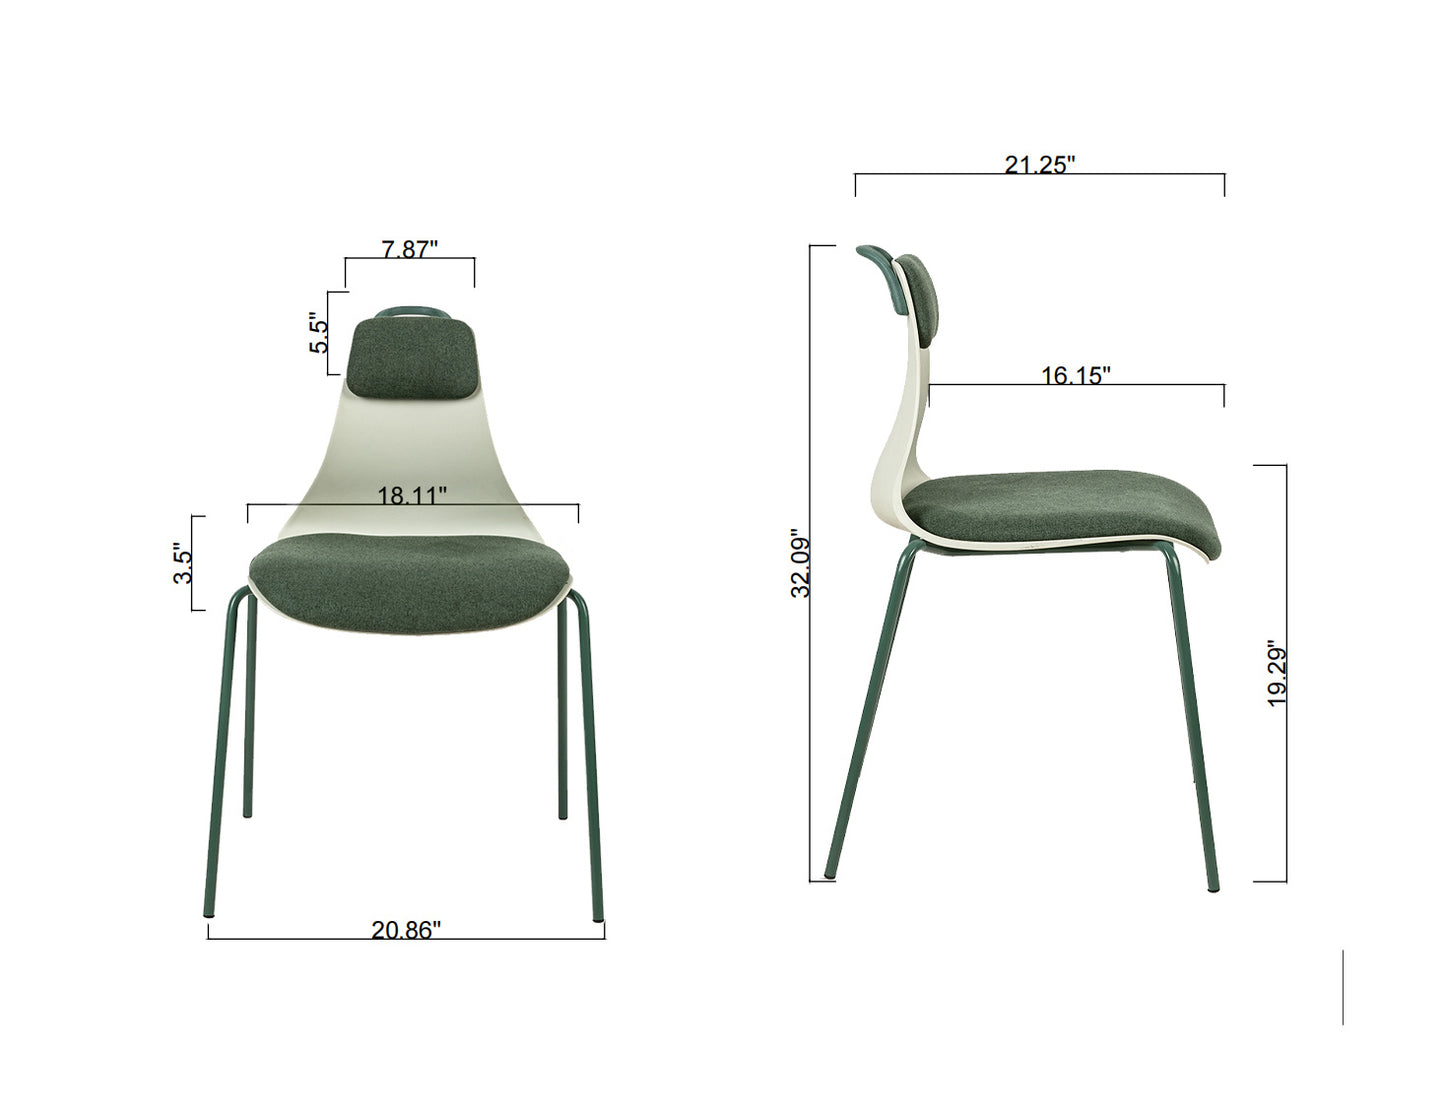 Set of two ;  Leisure chair dinning chair with pad custion; tilt degree 15°; 300LBS; red green